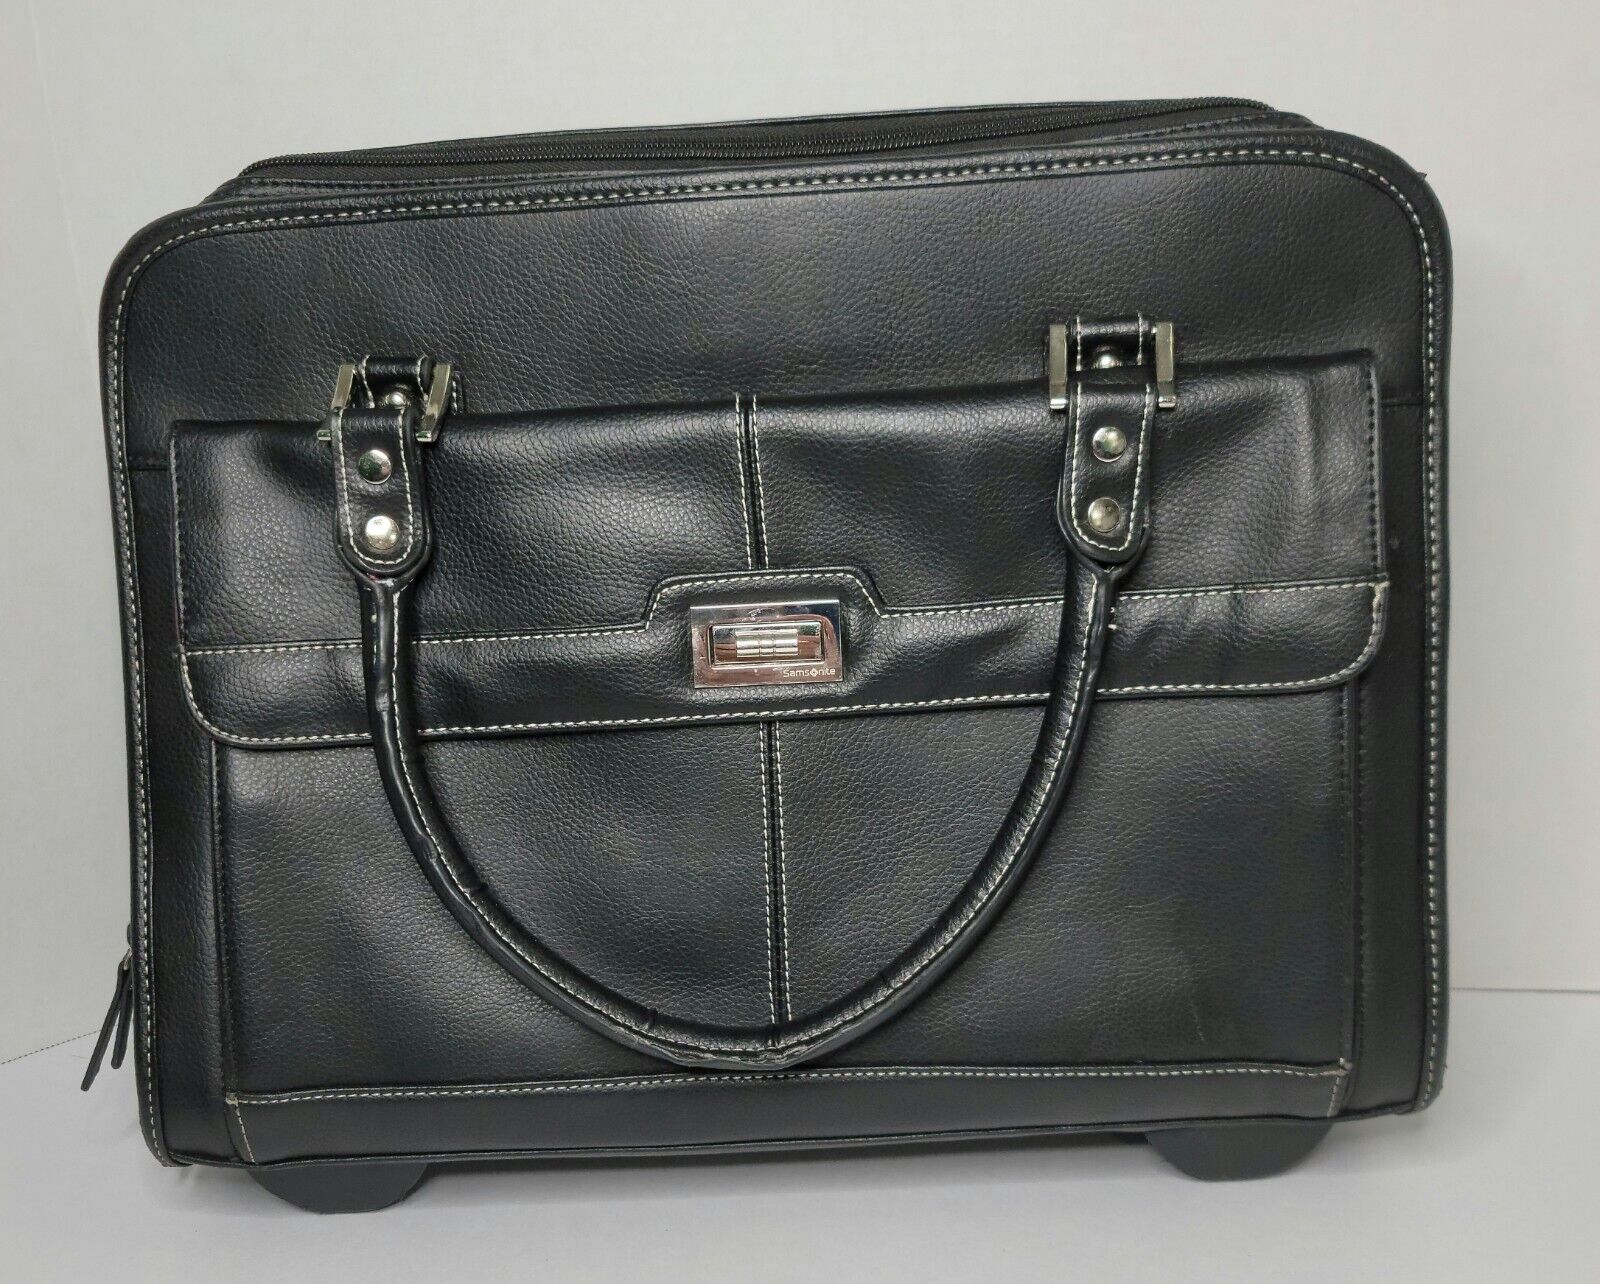 Samsonite Mobile Office Padded Laptop Carry & Extend Handles Wheels BLK Leather